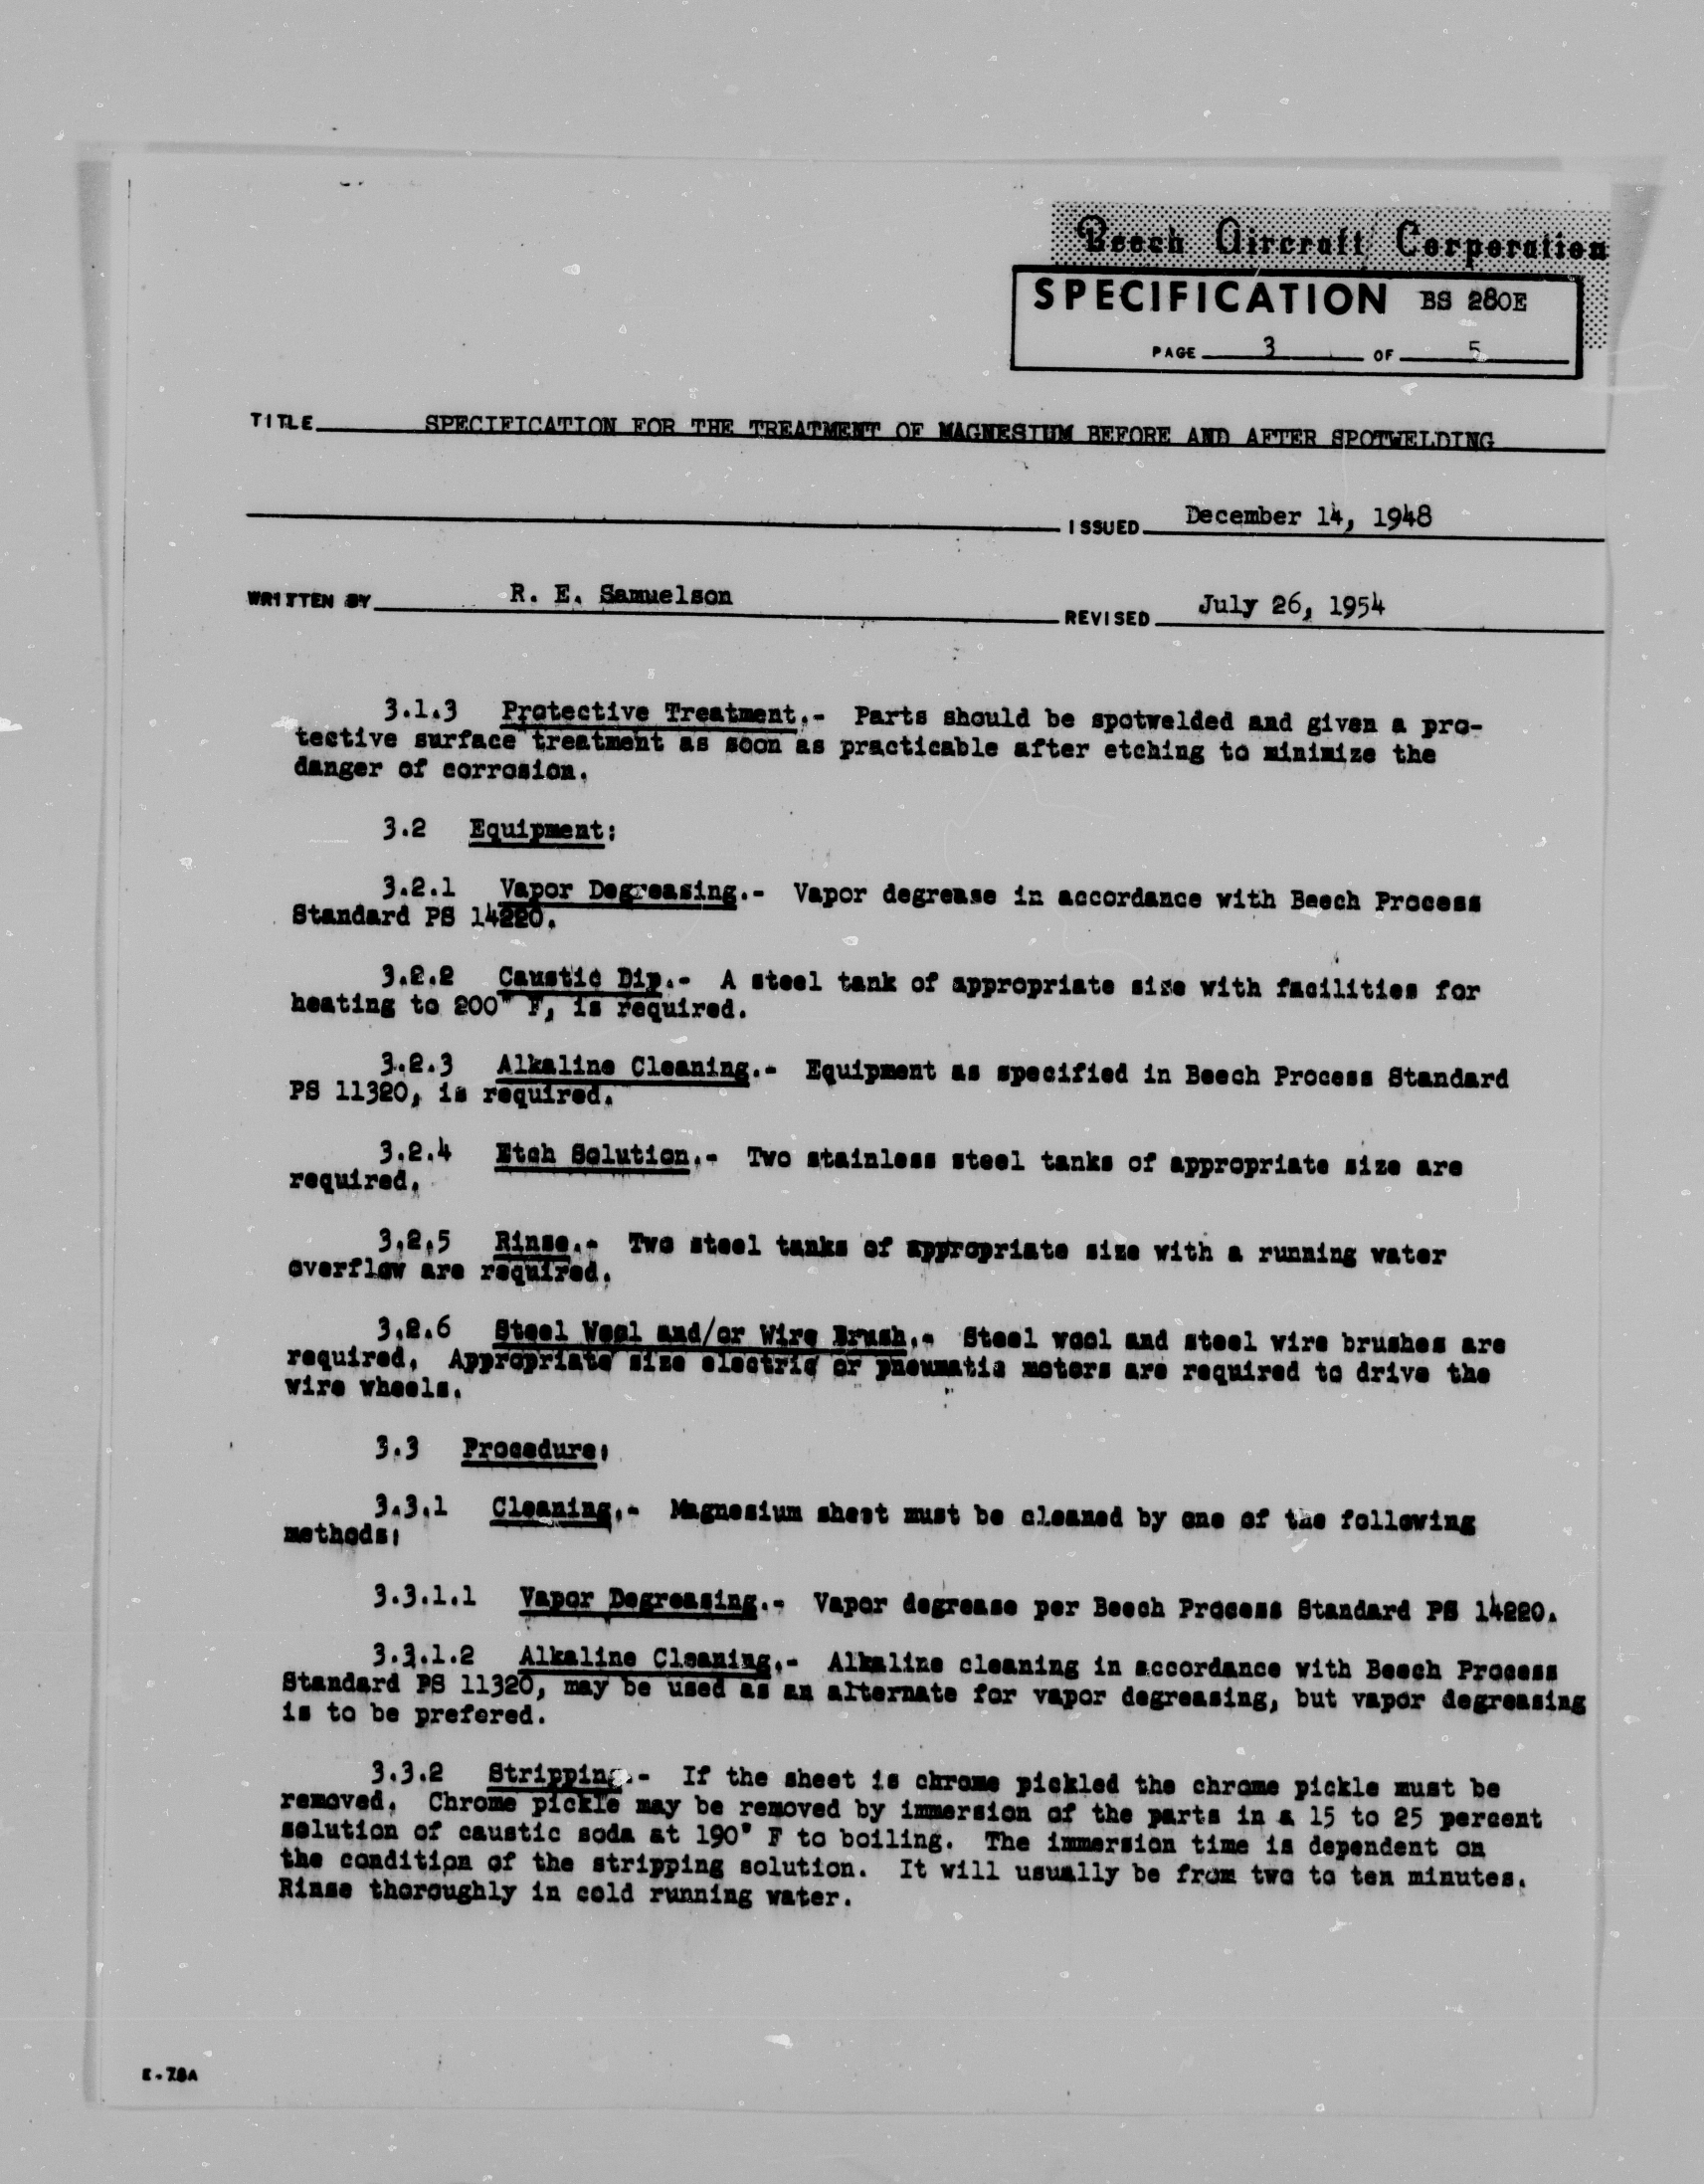 Sample page 4 from AirCorps Library document: Specification for the Treatment of Magnesium Before & After Spotwelding